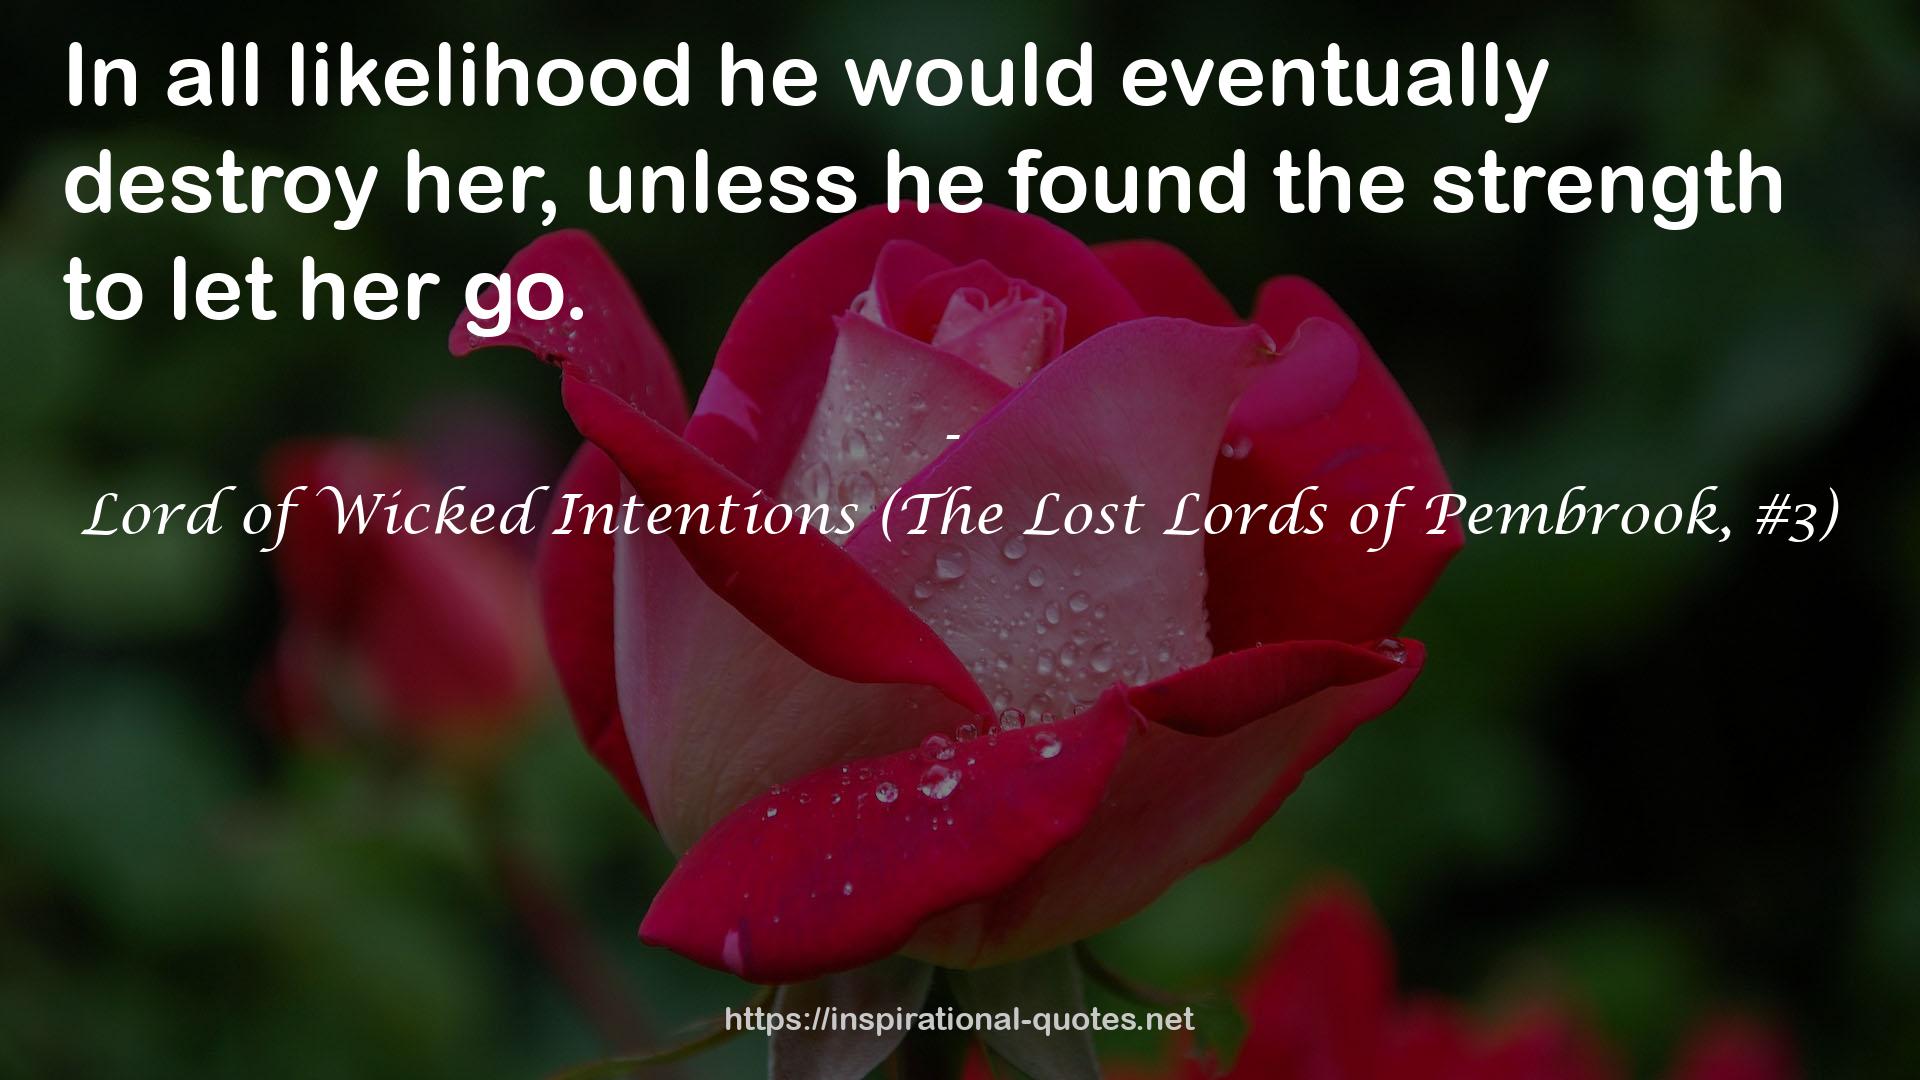 Lord of Wicked Intentions (The Lost Lords of Pembrook, #3) QUOTES